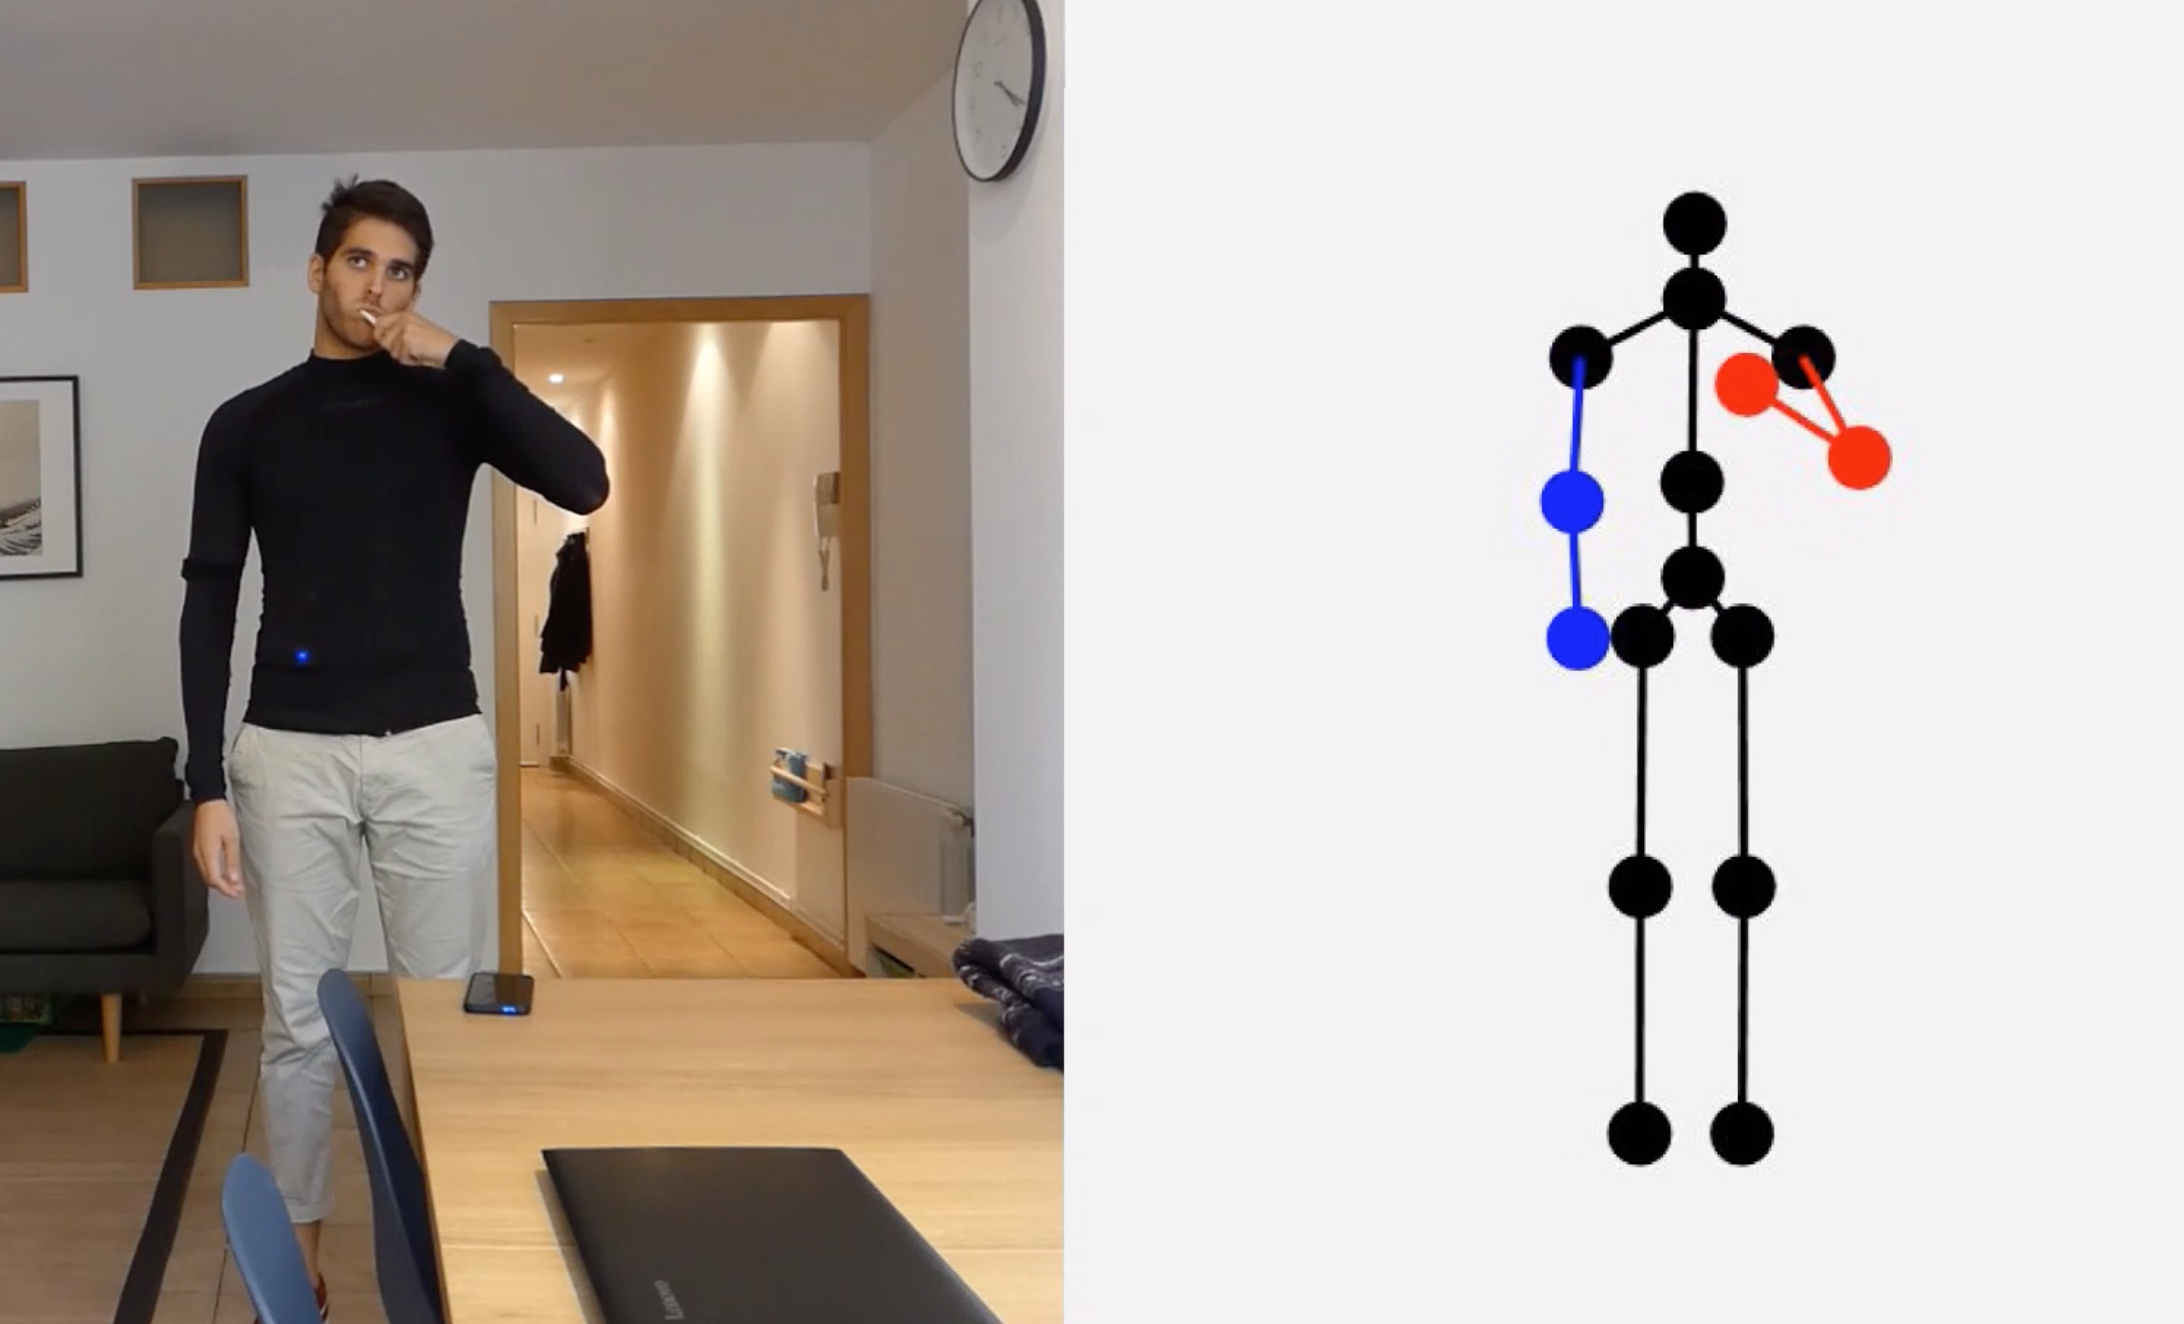 ArmTracker: A wearable system to monitor arm kinematics during daily life